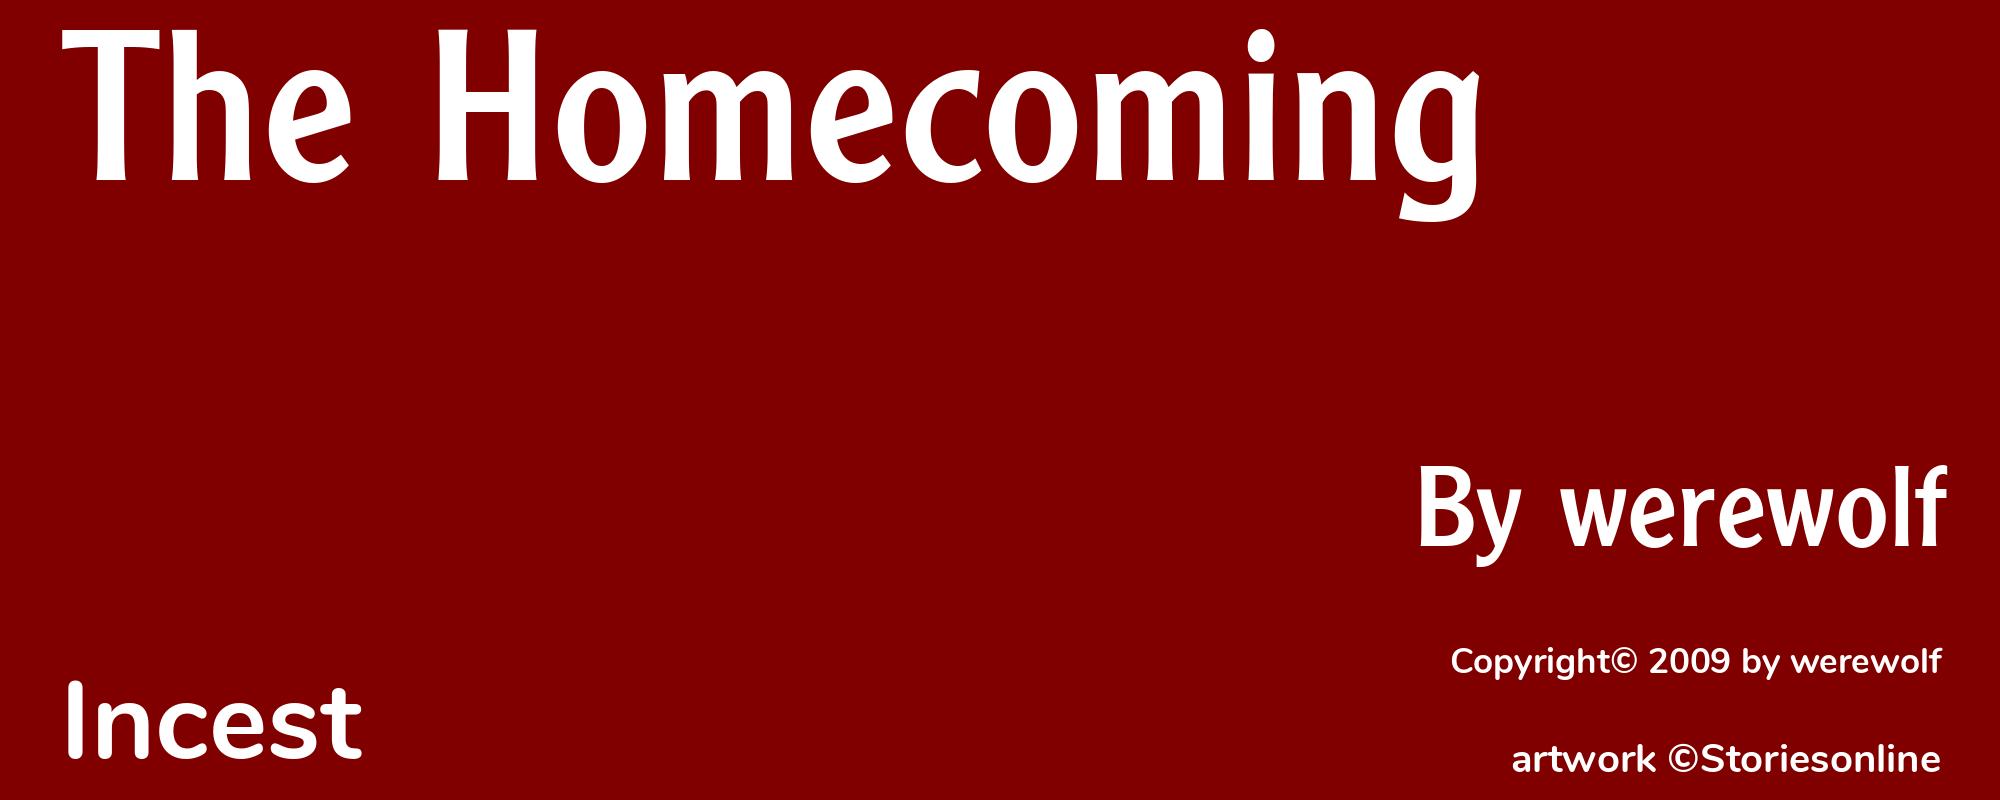 The Homecoming - Cover